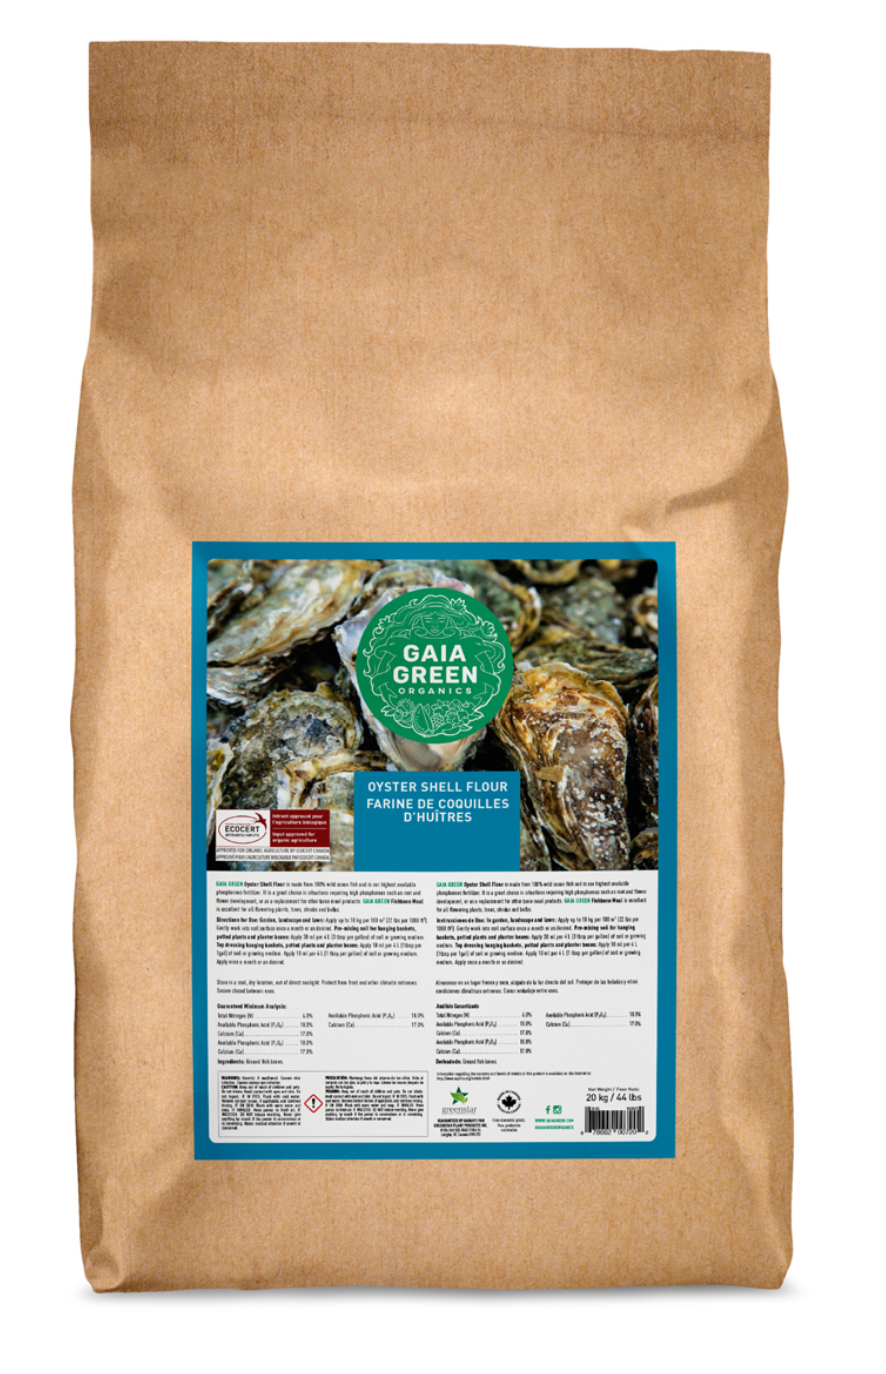 Product Image:Gaia Green Oyster Shell Flour 20KG